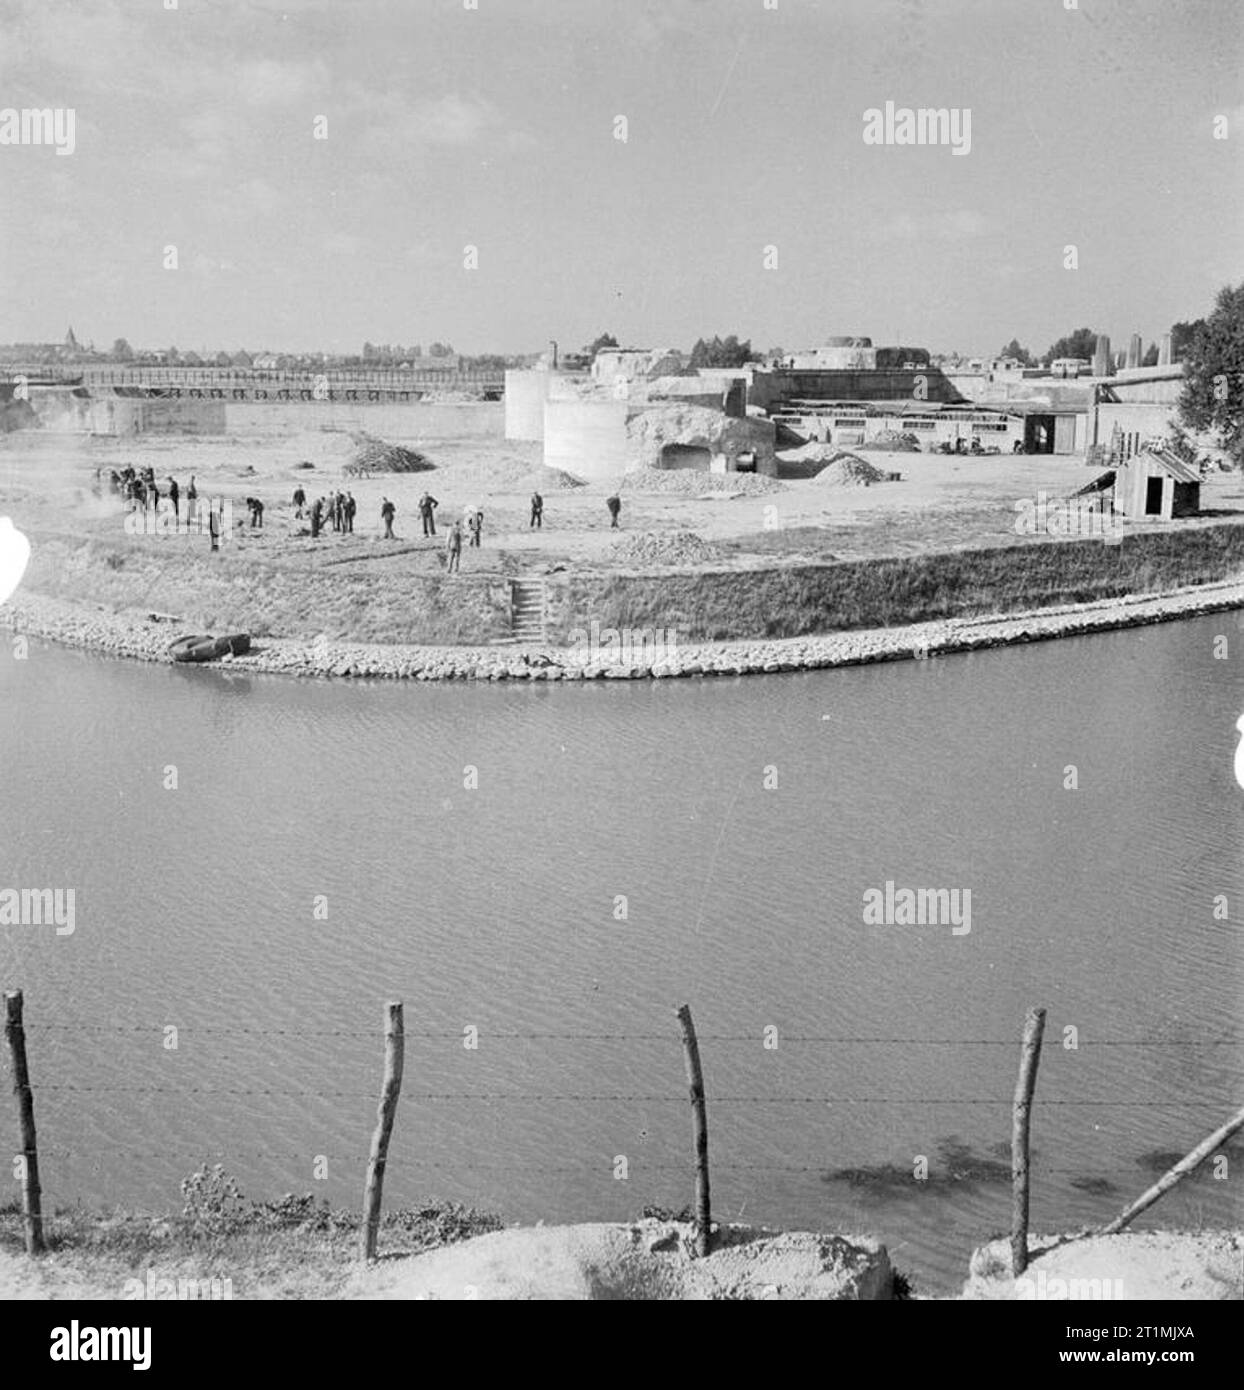 Nazi Persecution Gestapo interrogation and detention centre at Breedonck in Belgium: A general exterior view of the German prison at Breedonck showing the wide moat which surrounds it. Stock Photo